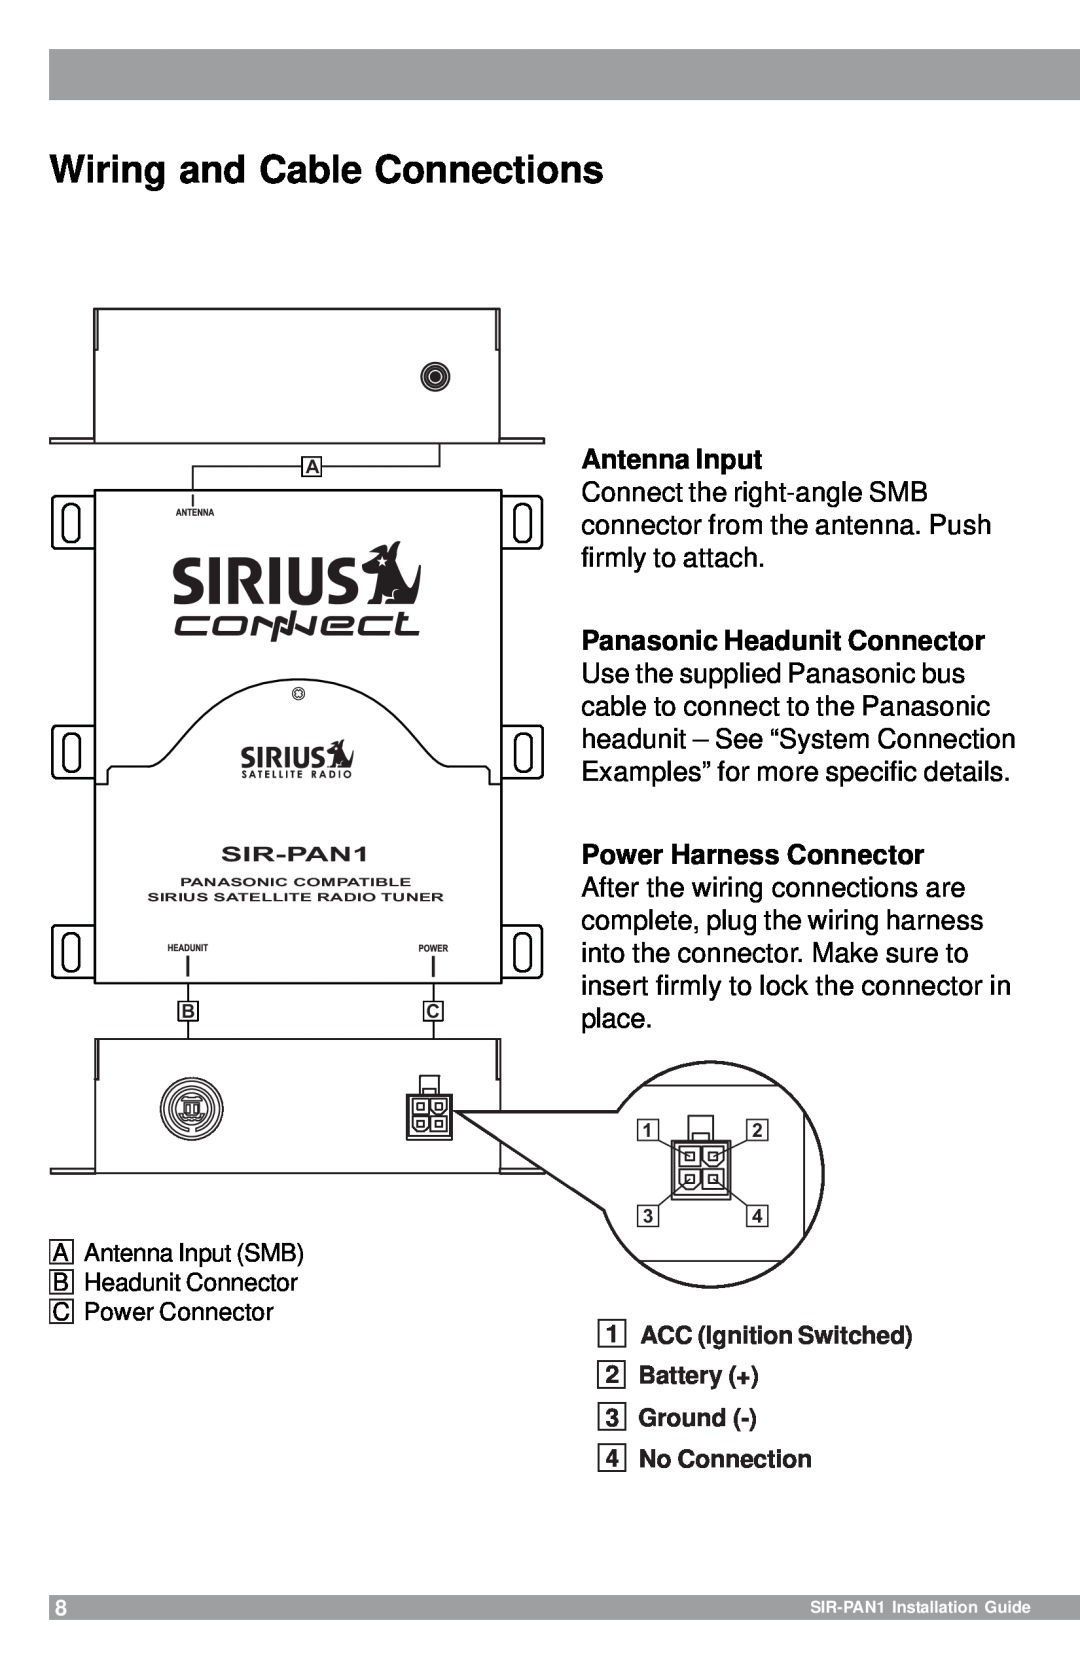 Sirius Satellite Radio SIR-PAN1 manual Wiring and Cable Connections 